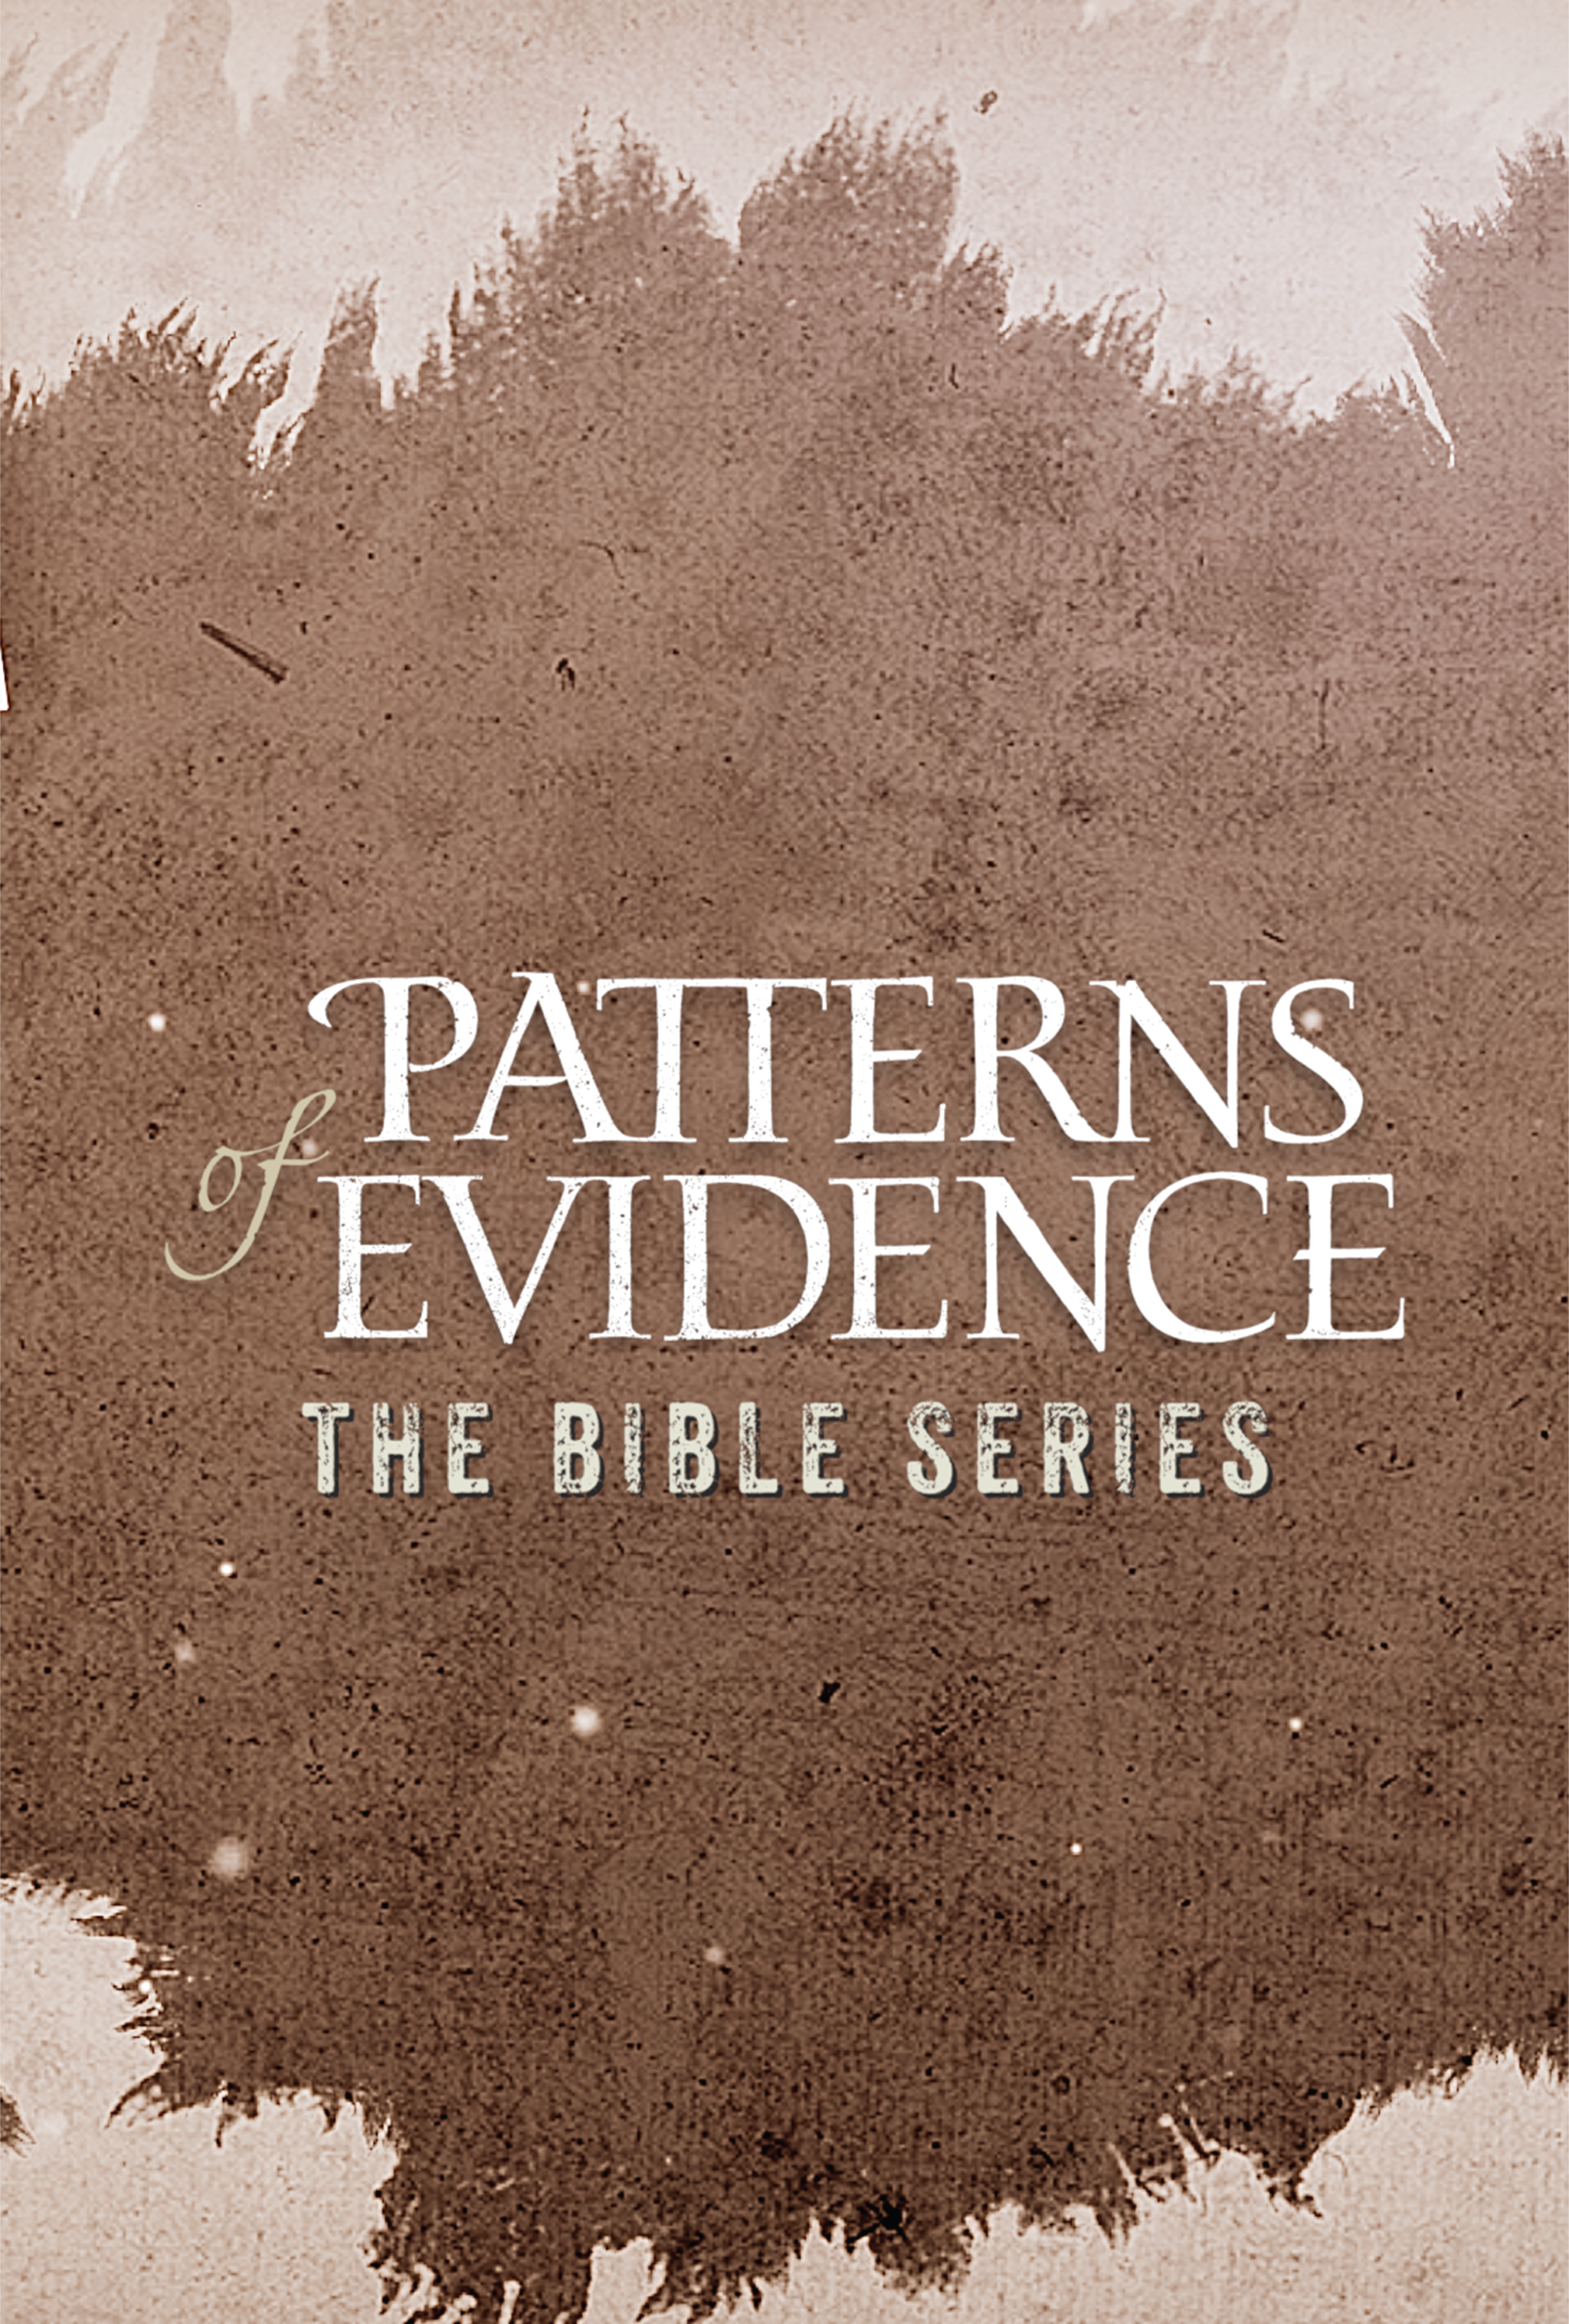 Patterns of Evidence: The Bible Series